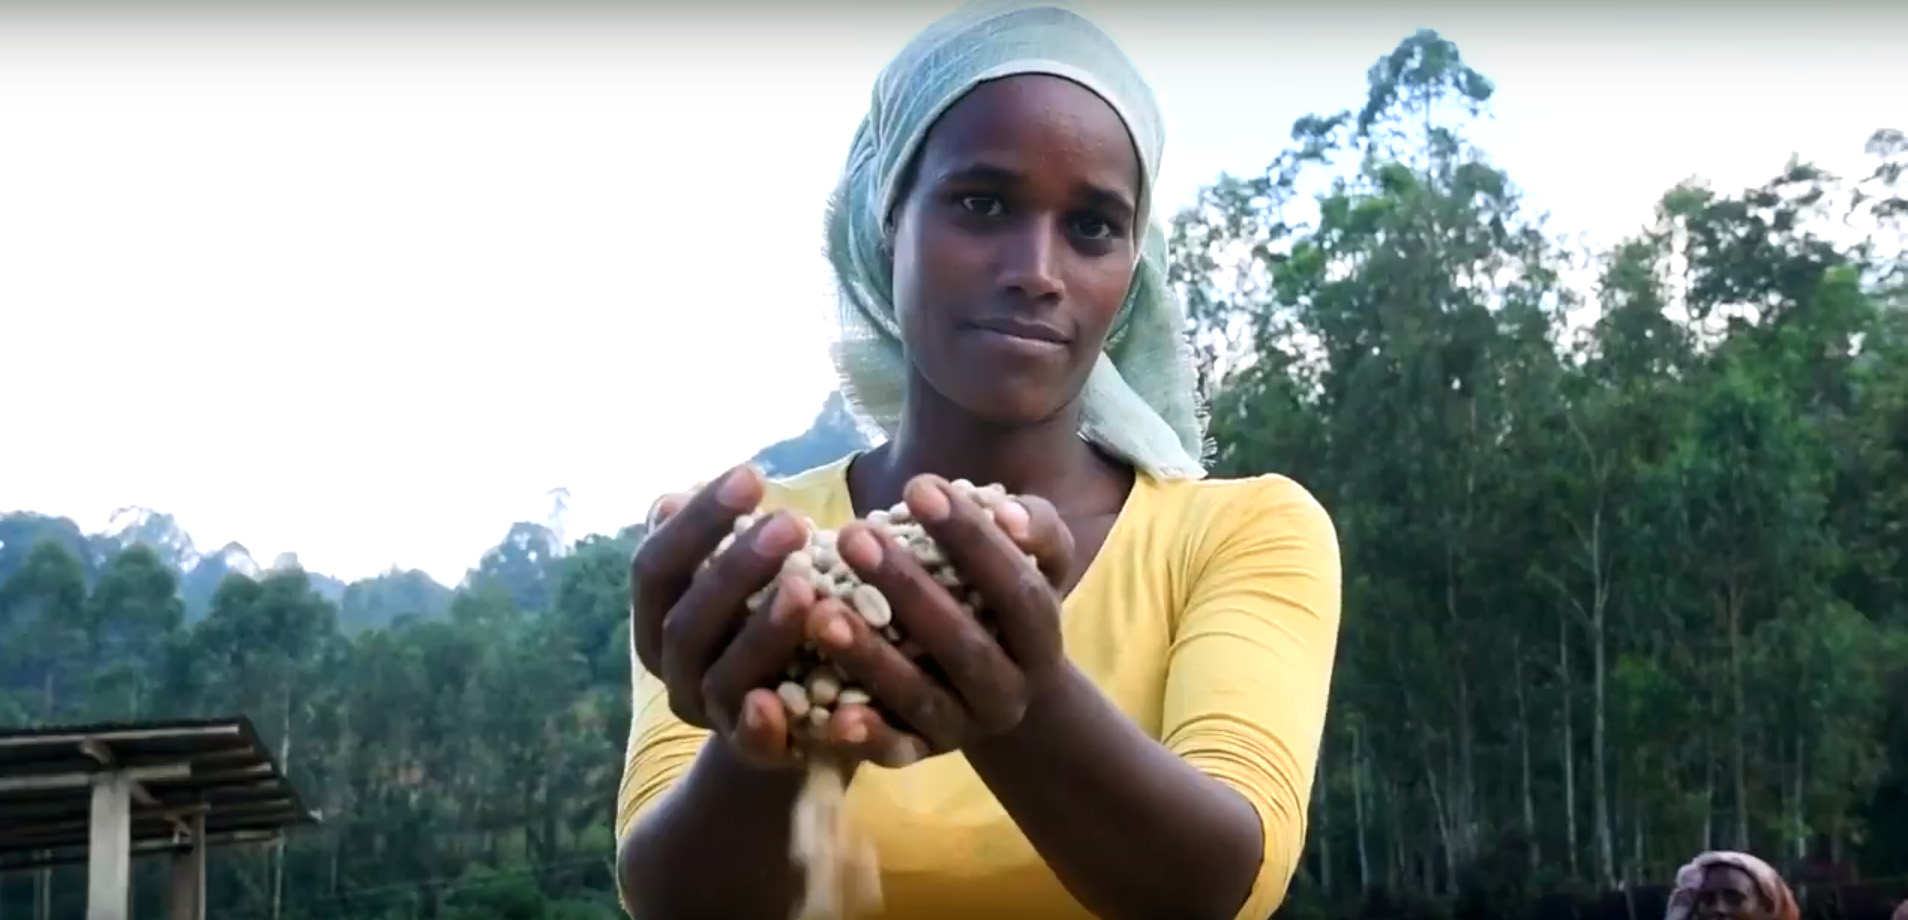 Still from the video "Coffee and honey from Ethiopian forests"